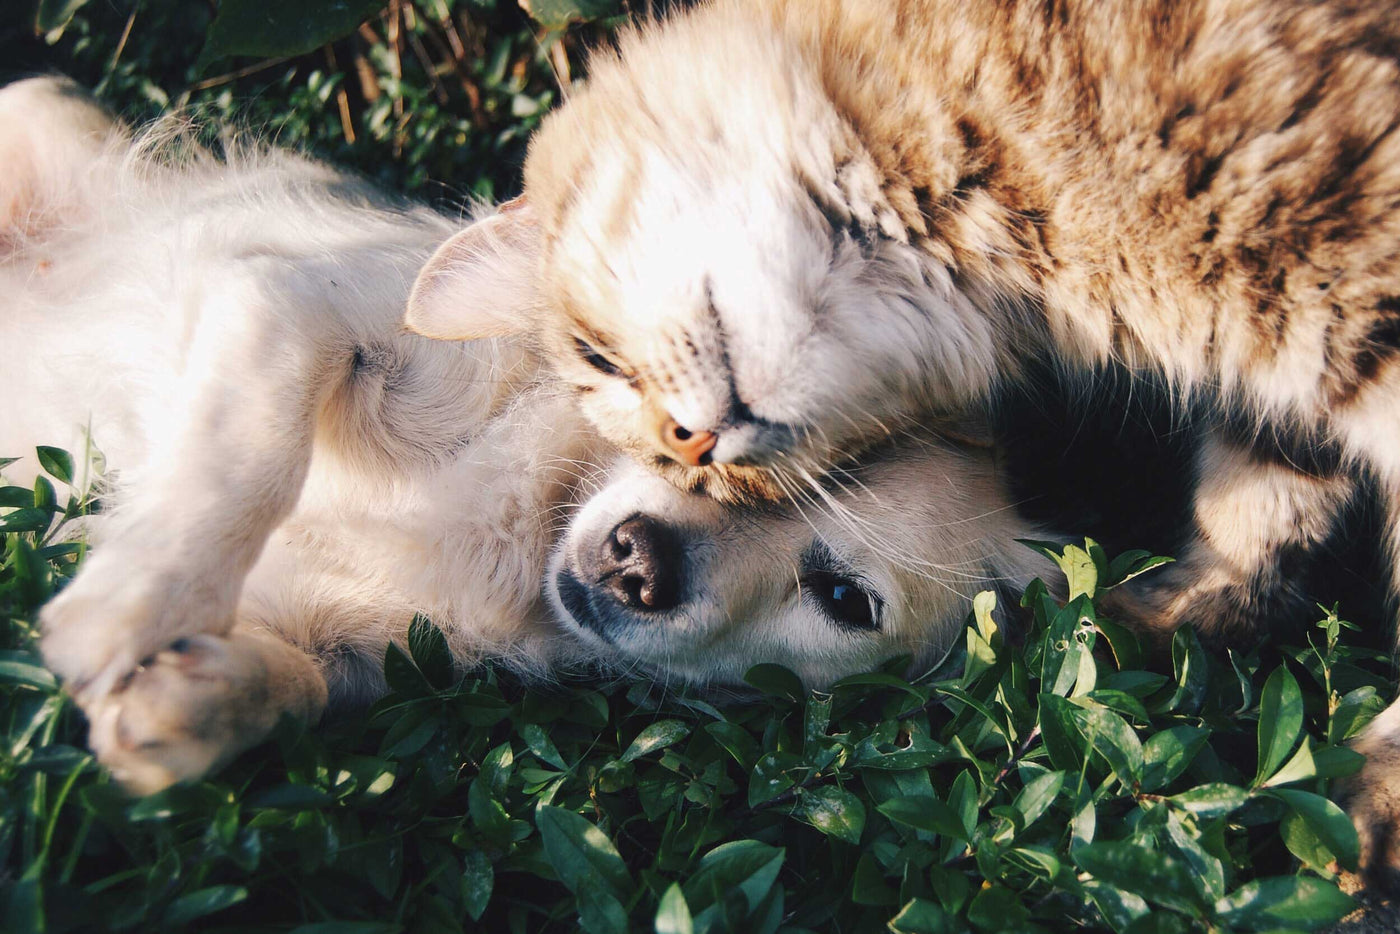 Sid & Lola: Supplements. Img: Ginger Cat and dog nuzzling together lying on their backs on the grass